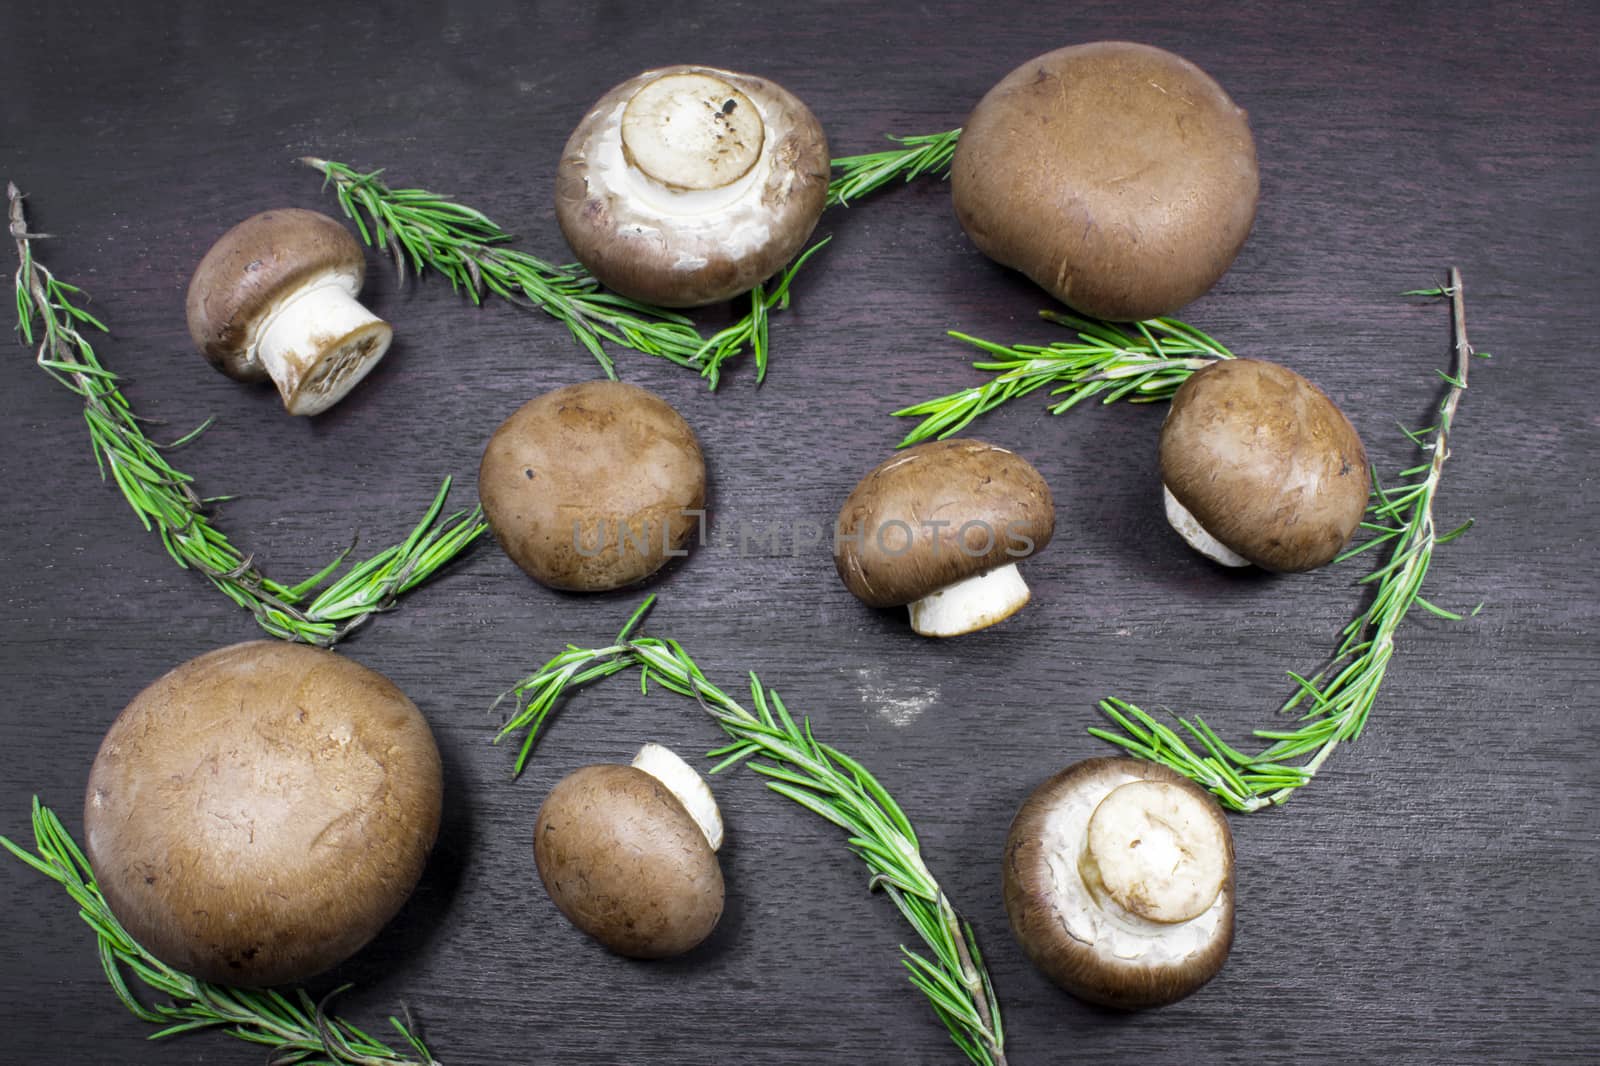 Champignon Mushrooms and Rosemary Scattered on a Cutting Board by seika_chujo